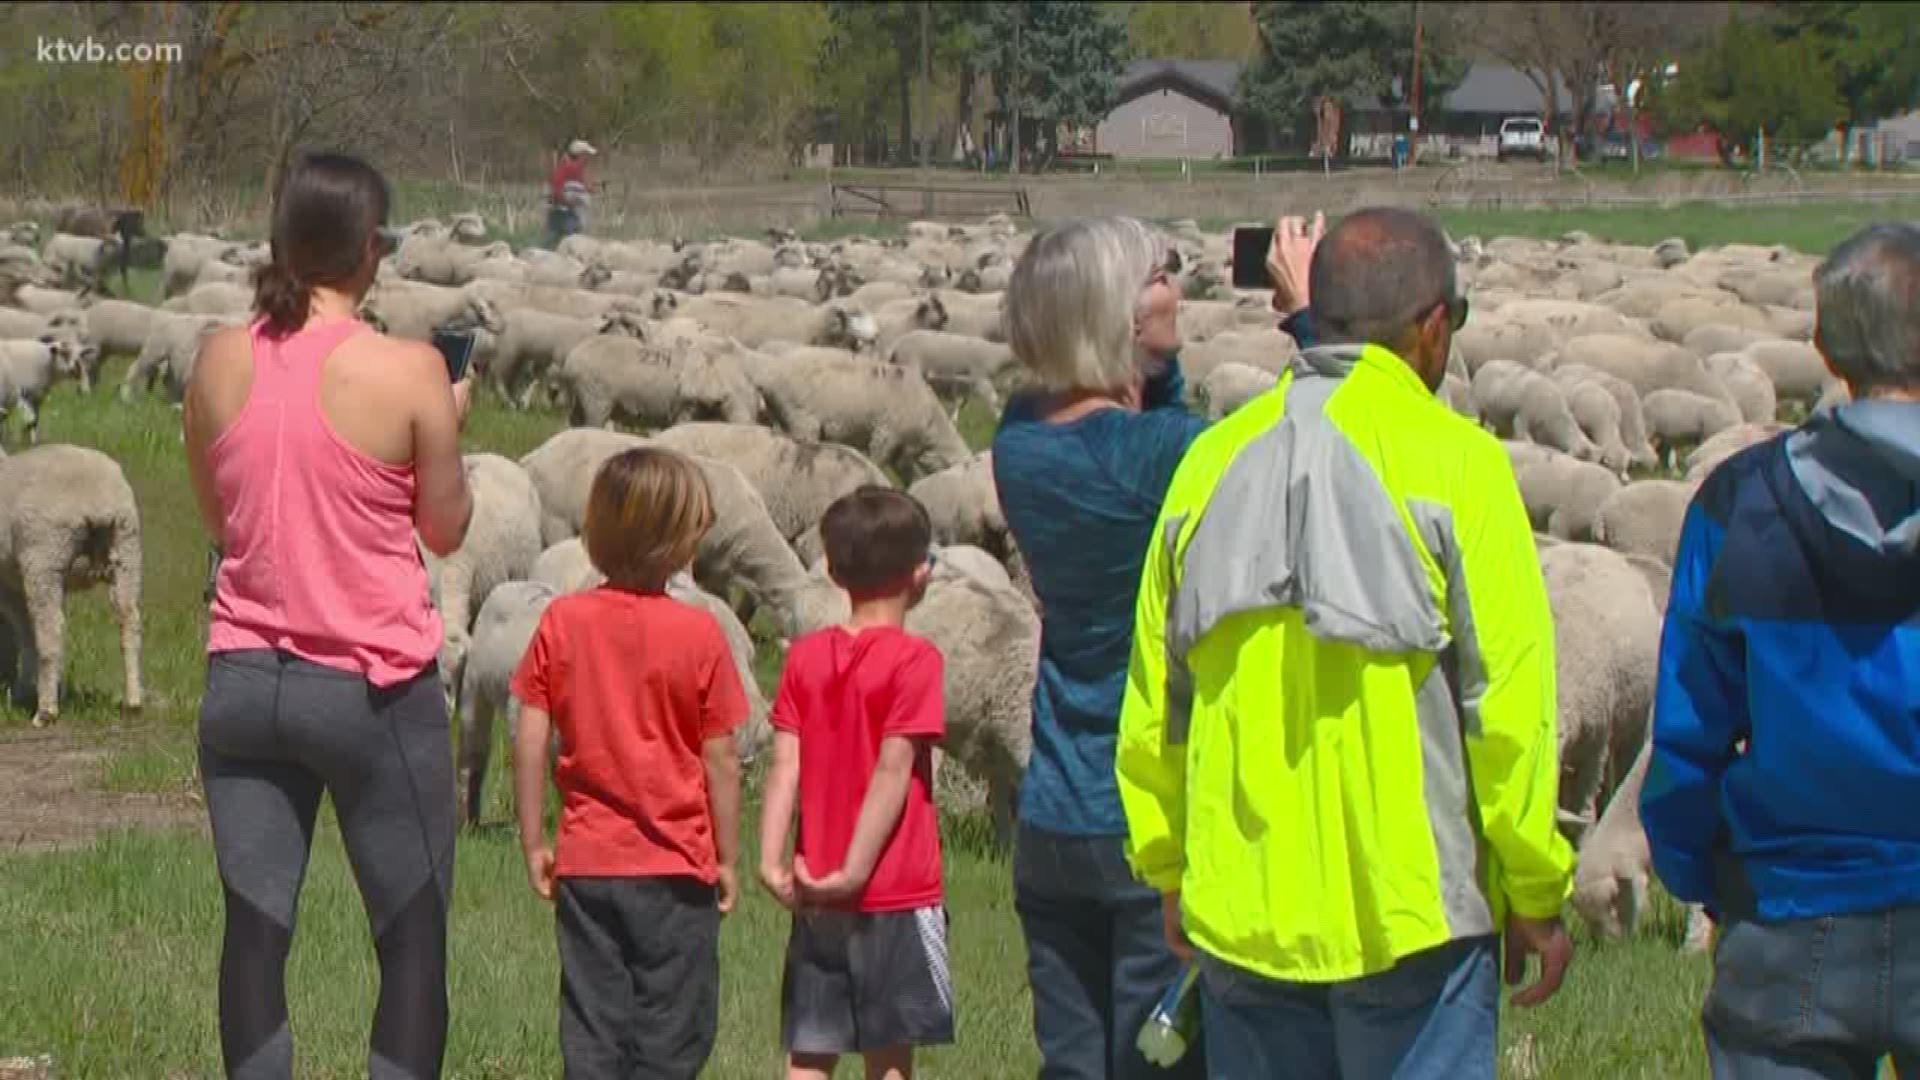 The sheep are now headed to the Boise foothills.